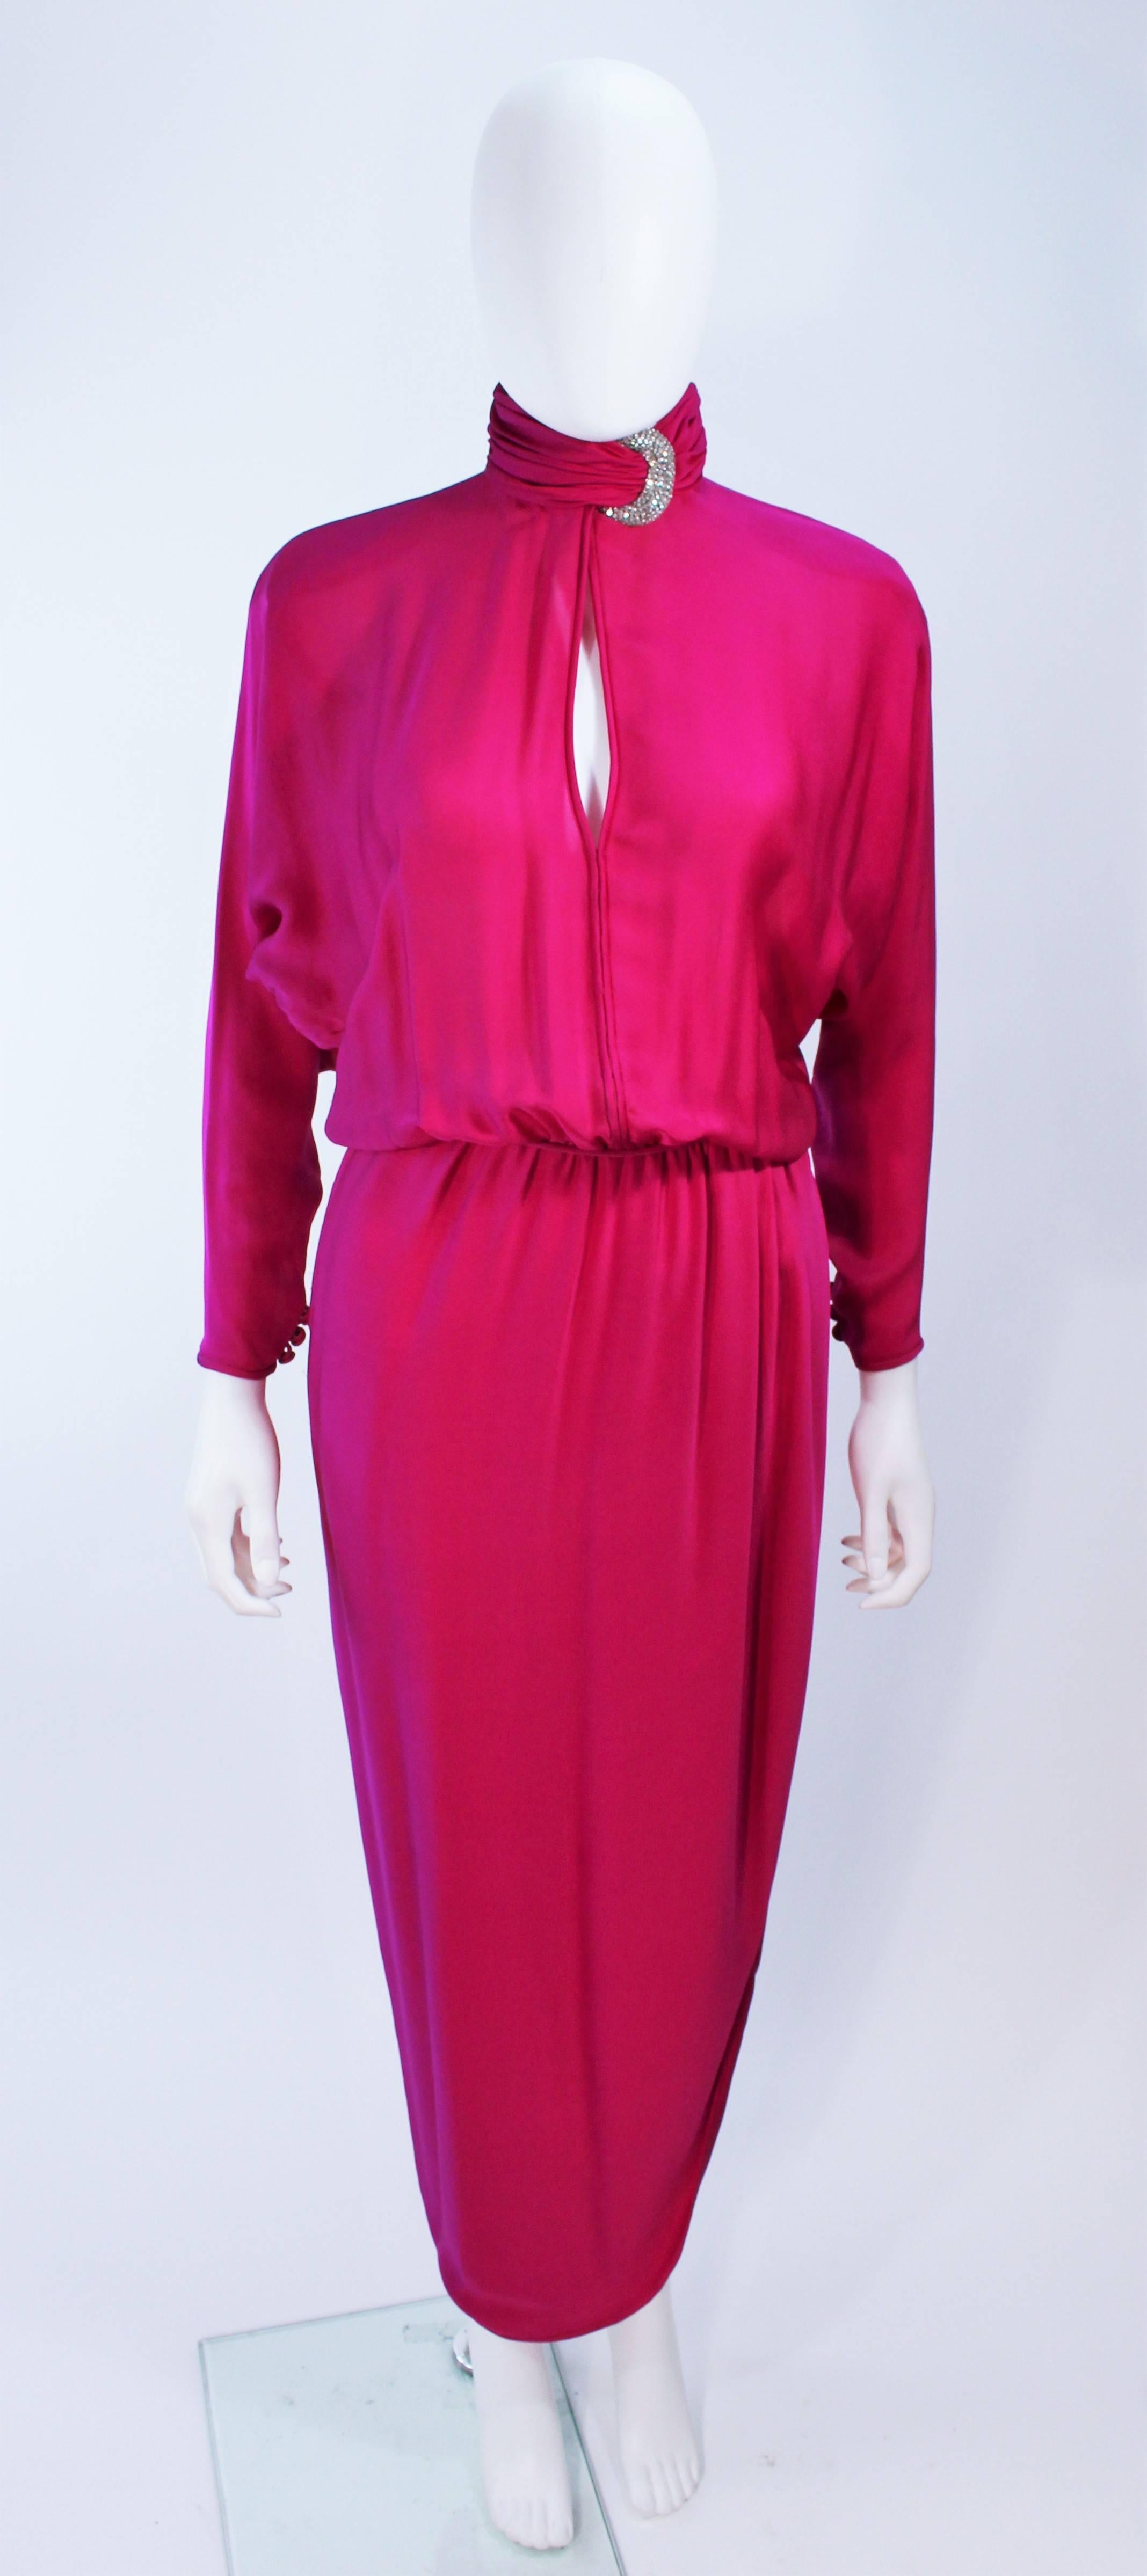 This Galanos attributed gown is composed of a magenta silk and feature rhinestone buckle accents (at the collar and waist). Features a side slit with mock collar. There are side closures and buttons at the cuff. In excellent vintage condition, some